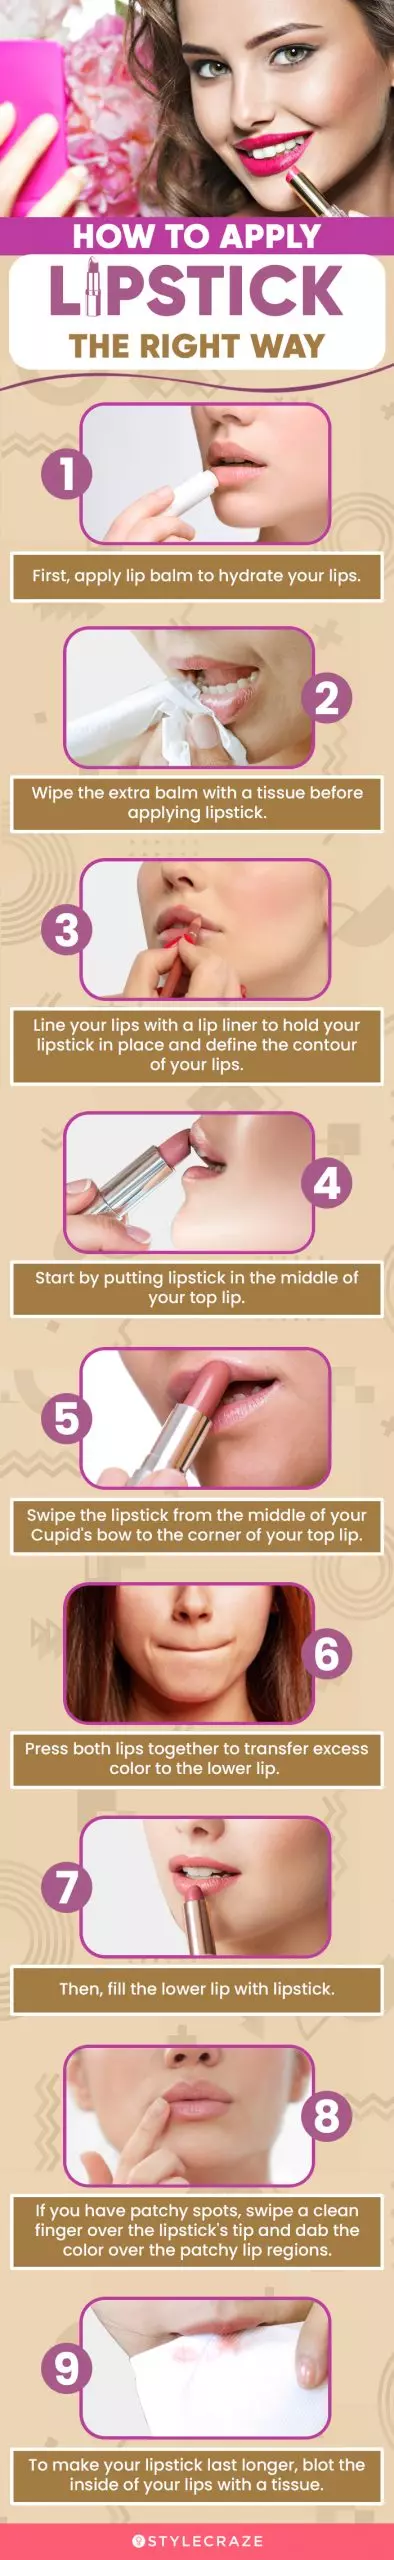 How To Apply Lipstick The Right Way (infographic)